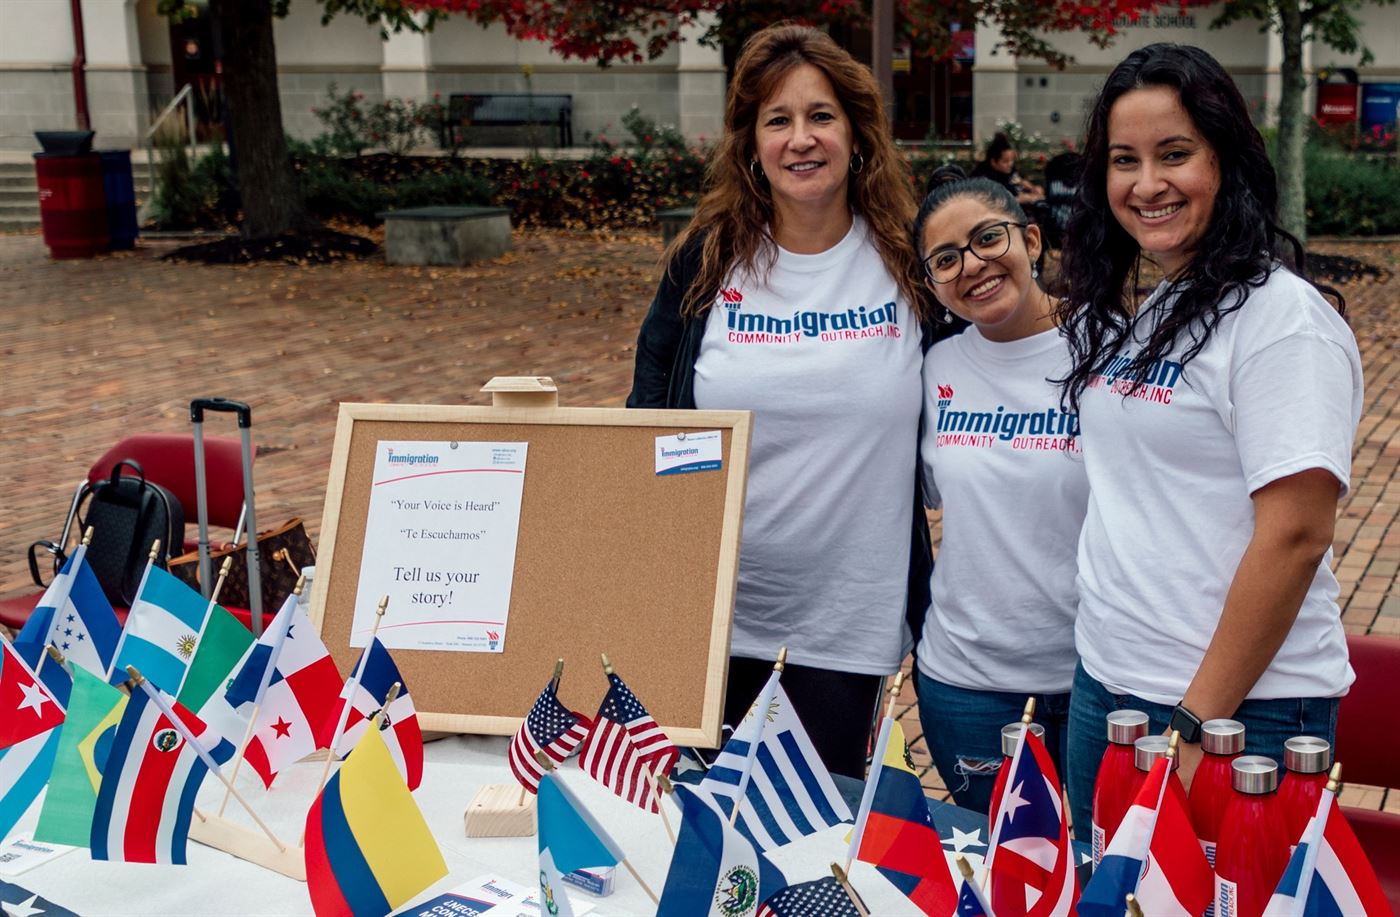 Members of Immigration Community Outreach, Daniela, Deloris and Mayra, at the Student Center Quad. Photo courtesy of Karsten Englander